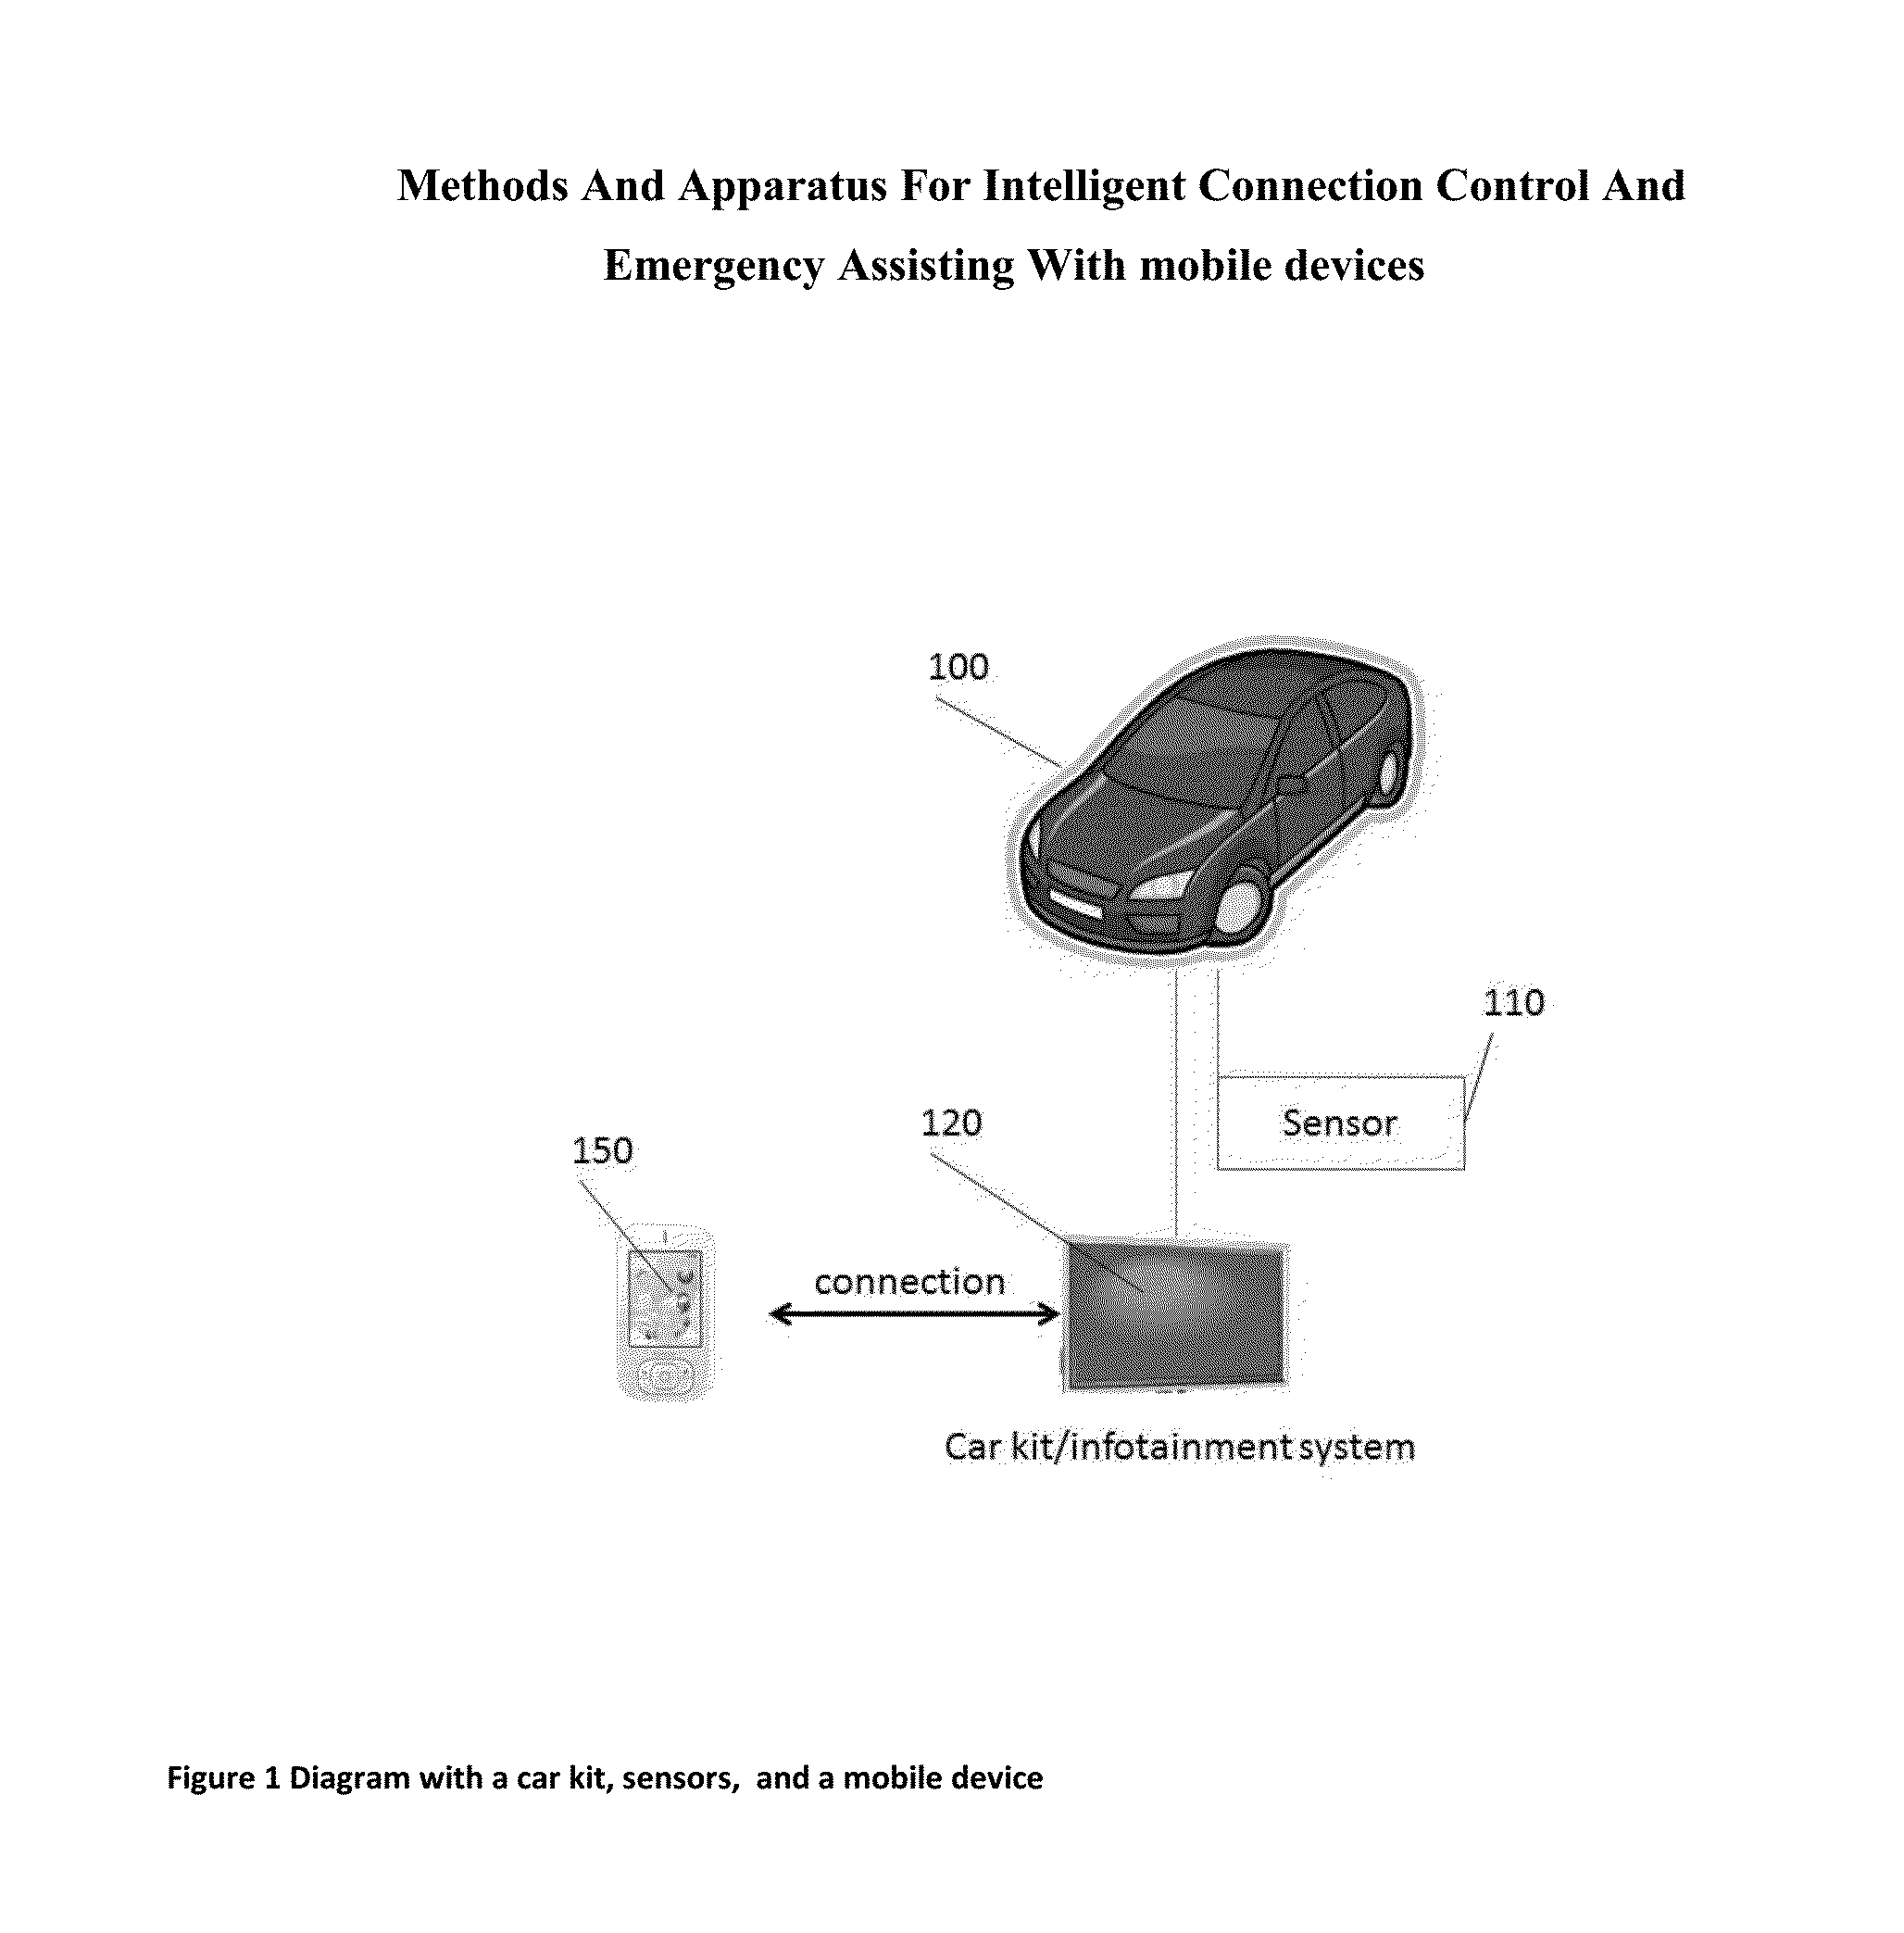 Methods And Apparatus For Intelligent Connection Control And Emergency Assisting With mobile devices